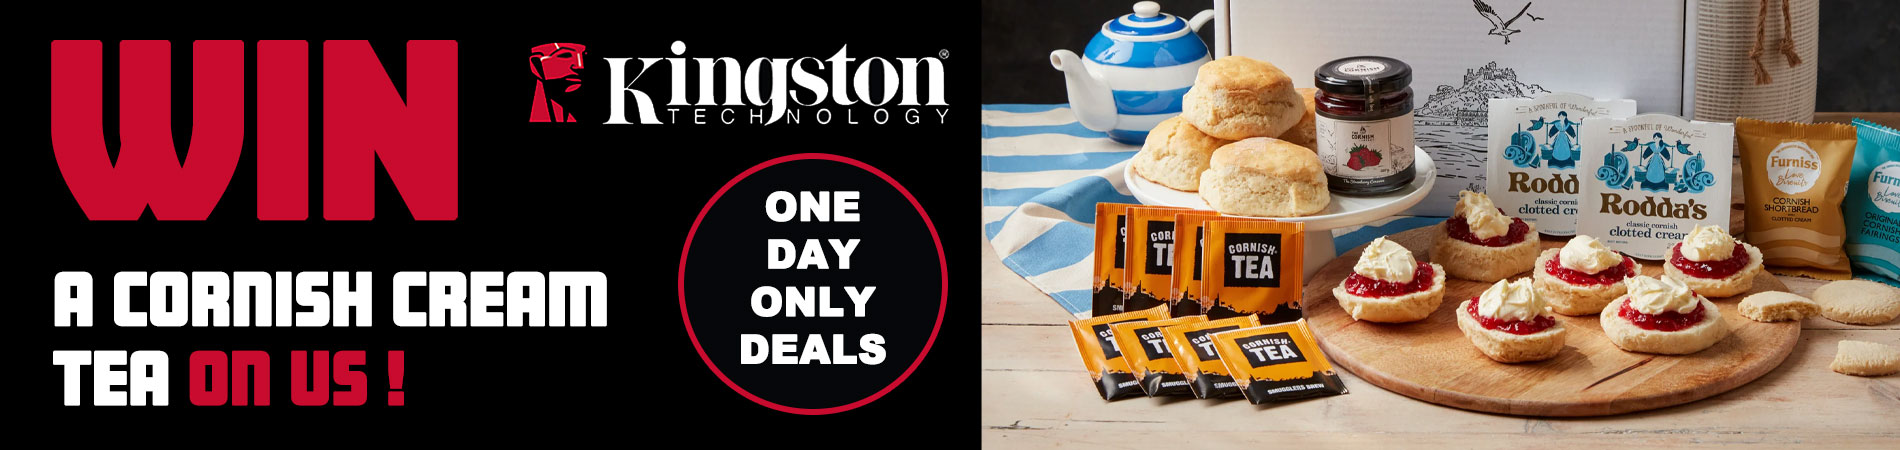 One Day Only Kingston Deals